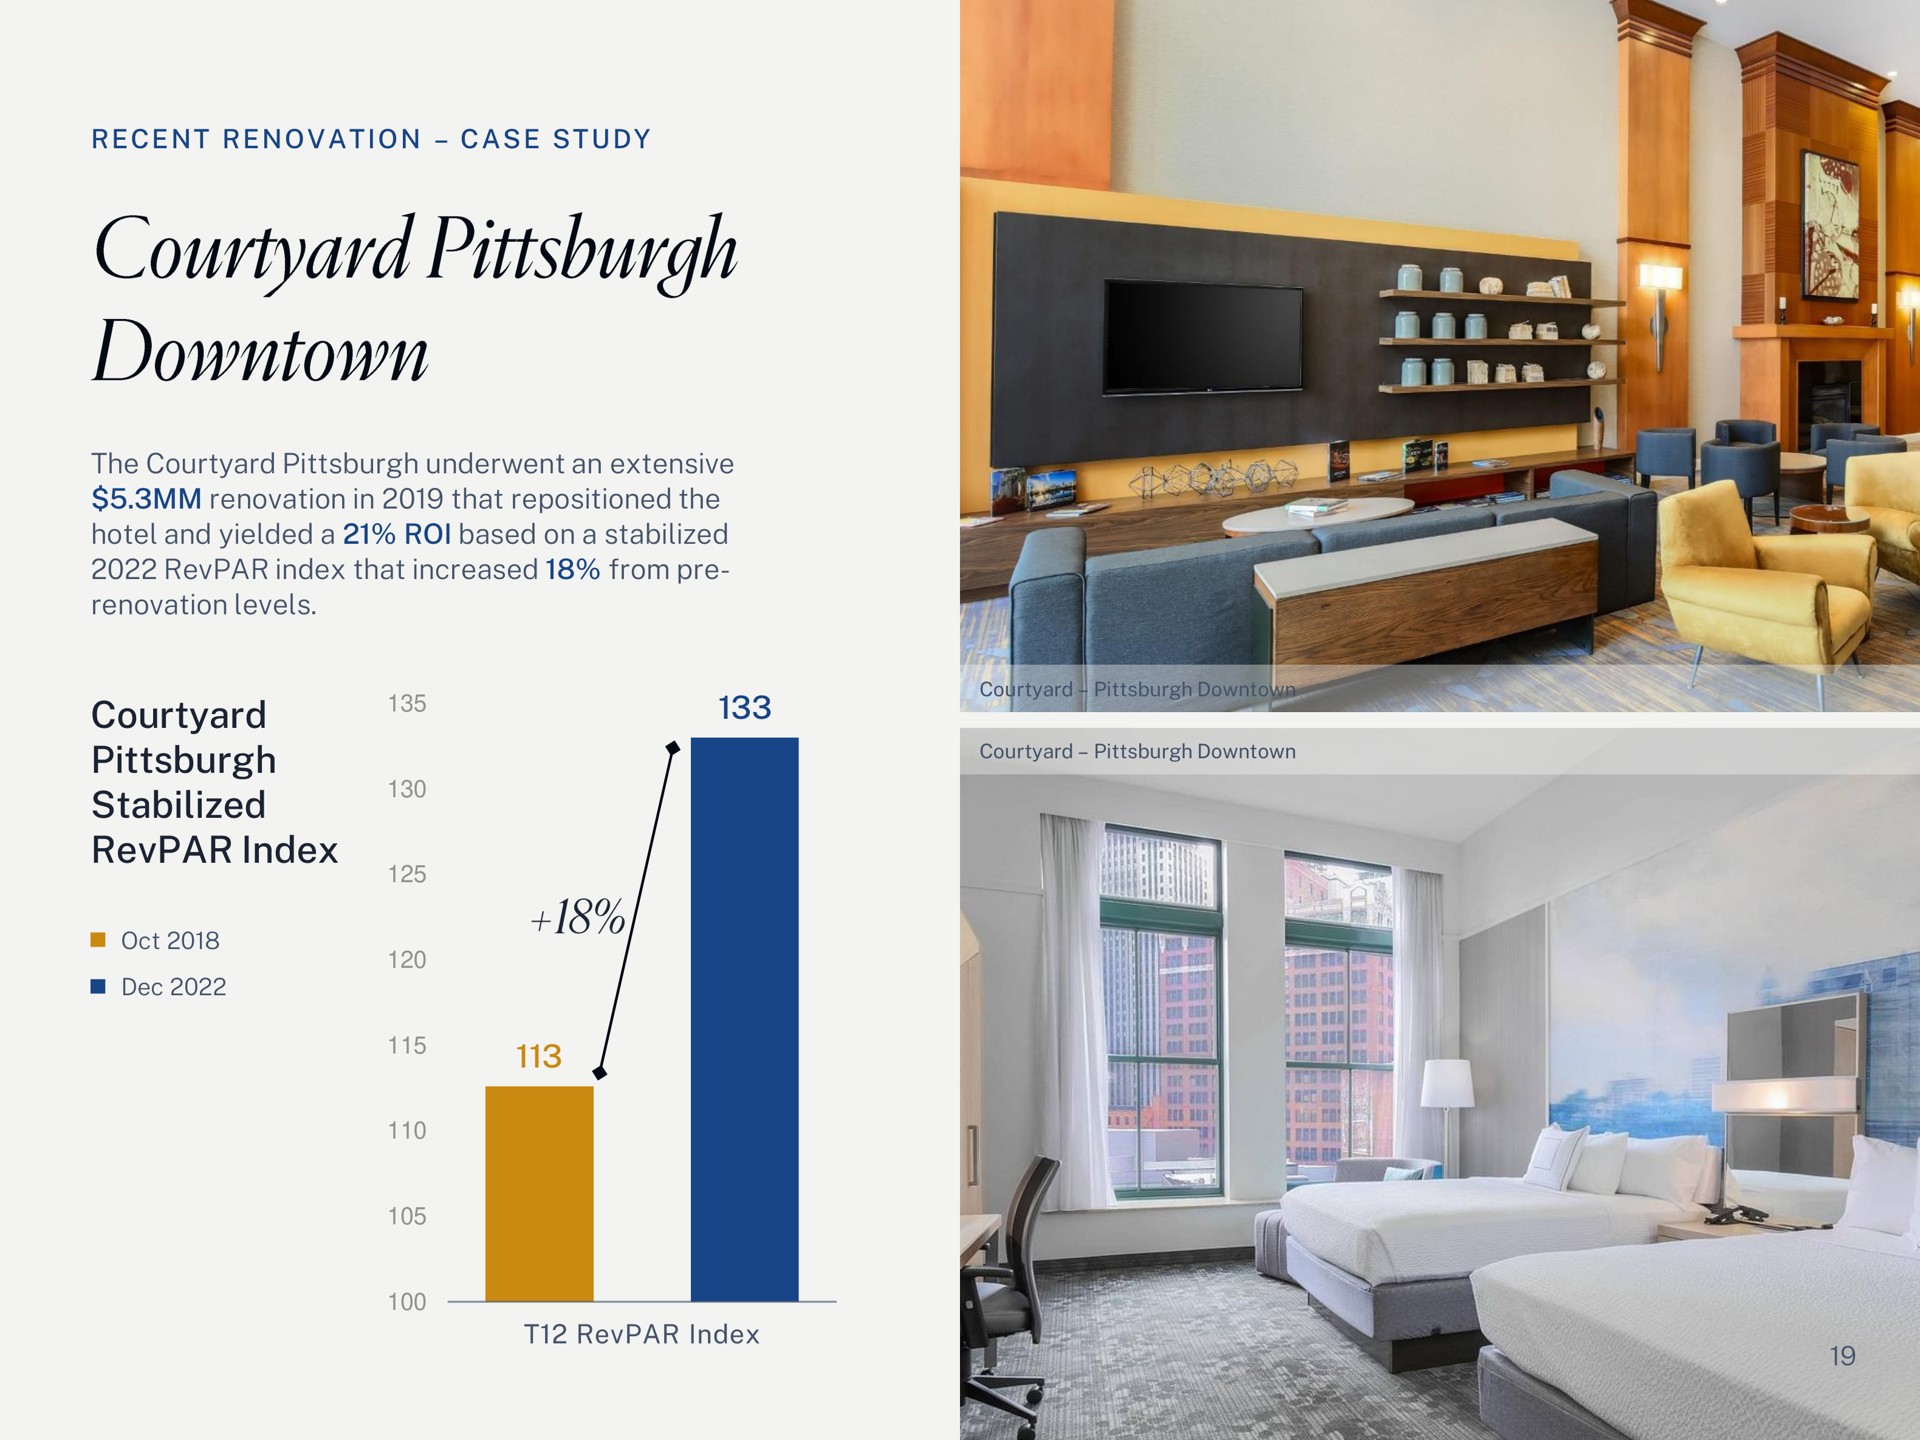 case study the courtyard underwent an extensive renovation in that repositioned the hotel and yielded a roi based on a stabilized index that increased from renovation levels courtyard stabilized index index downtown | Summit Hotel Properties